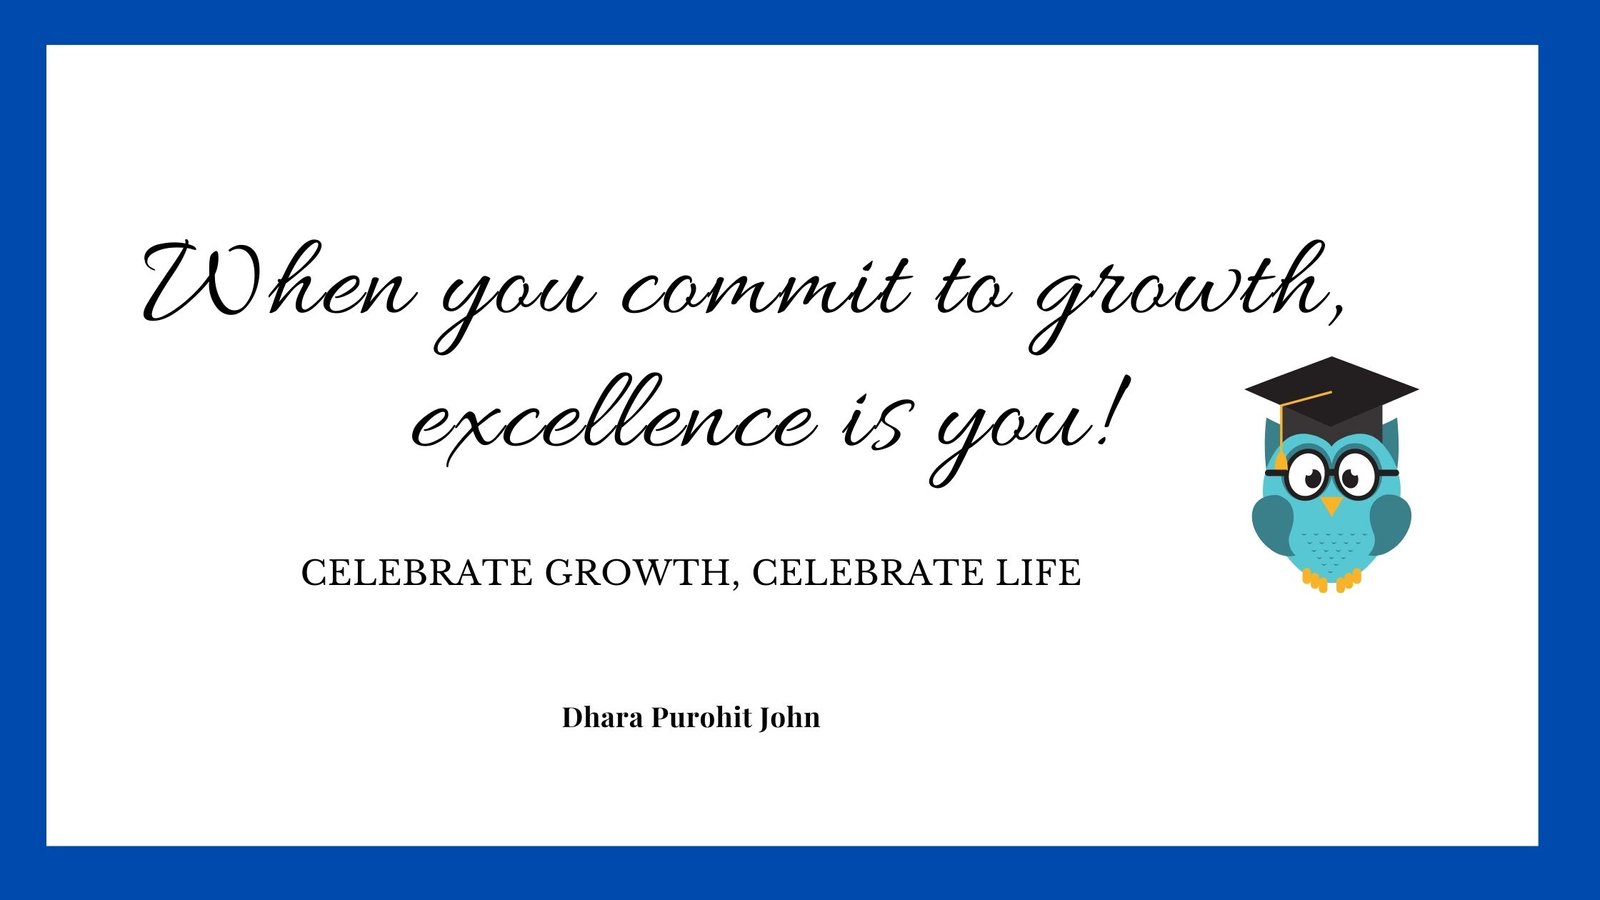 When you commit to growth, Excellence is you!